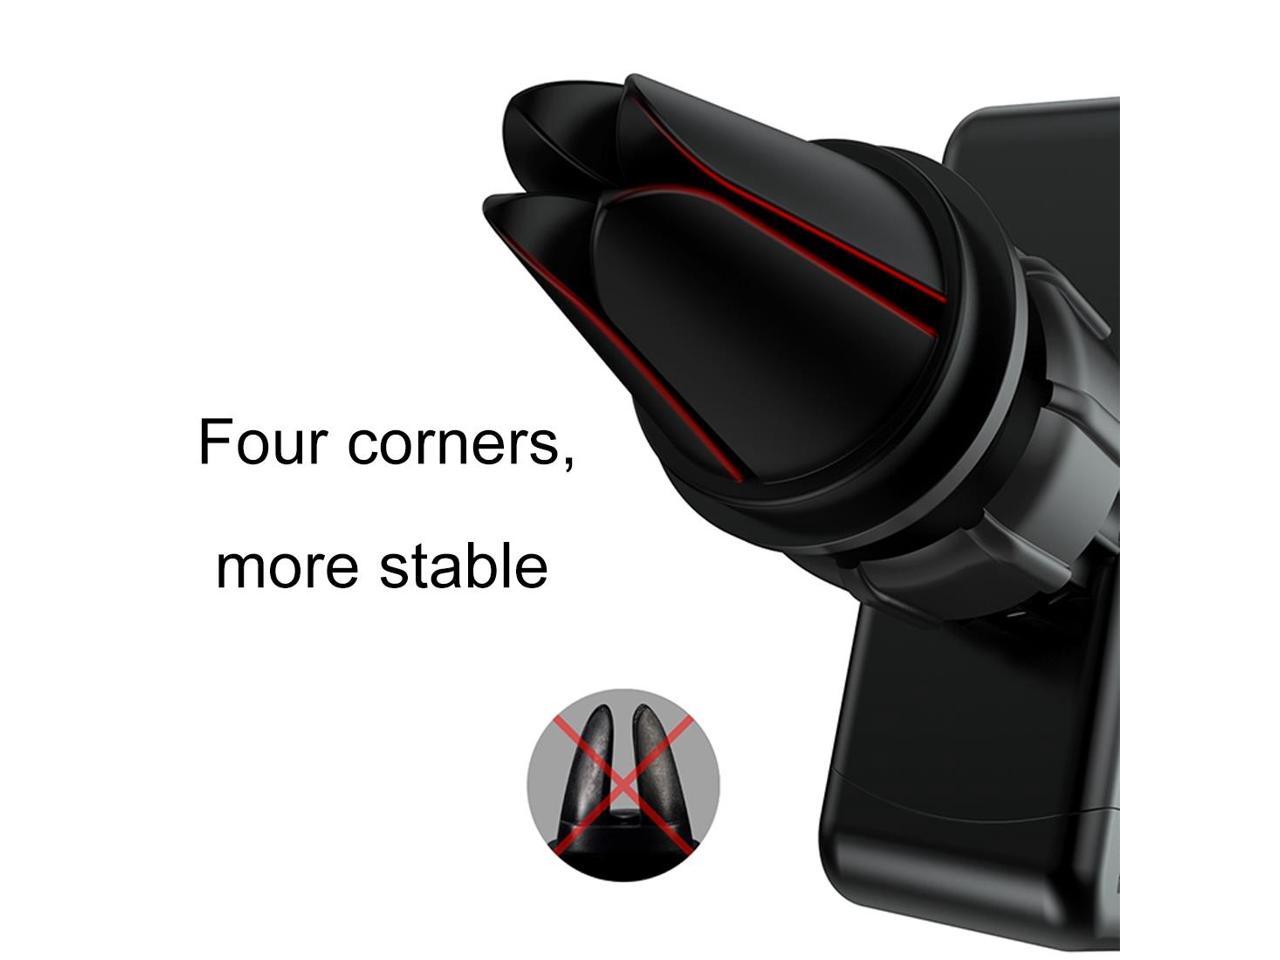 JOYROOM JR-ZS110 Mini Universal Car Air Vent Mount 360 Degree Rotation Phone Holder Stand, For iPhone, Galaxy, Sony, Lenovo, HTC, Huawei and other 4-6 inch Smartphones (Black) - Newegg.com